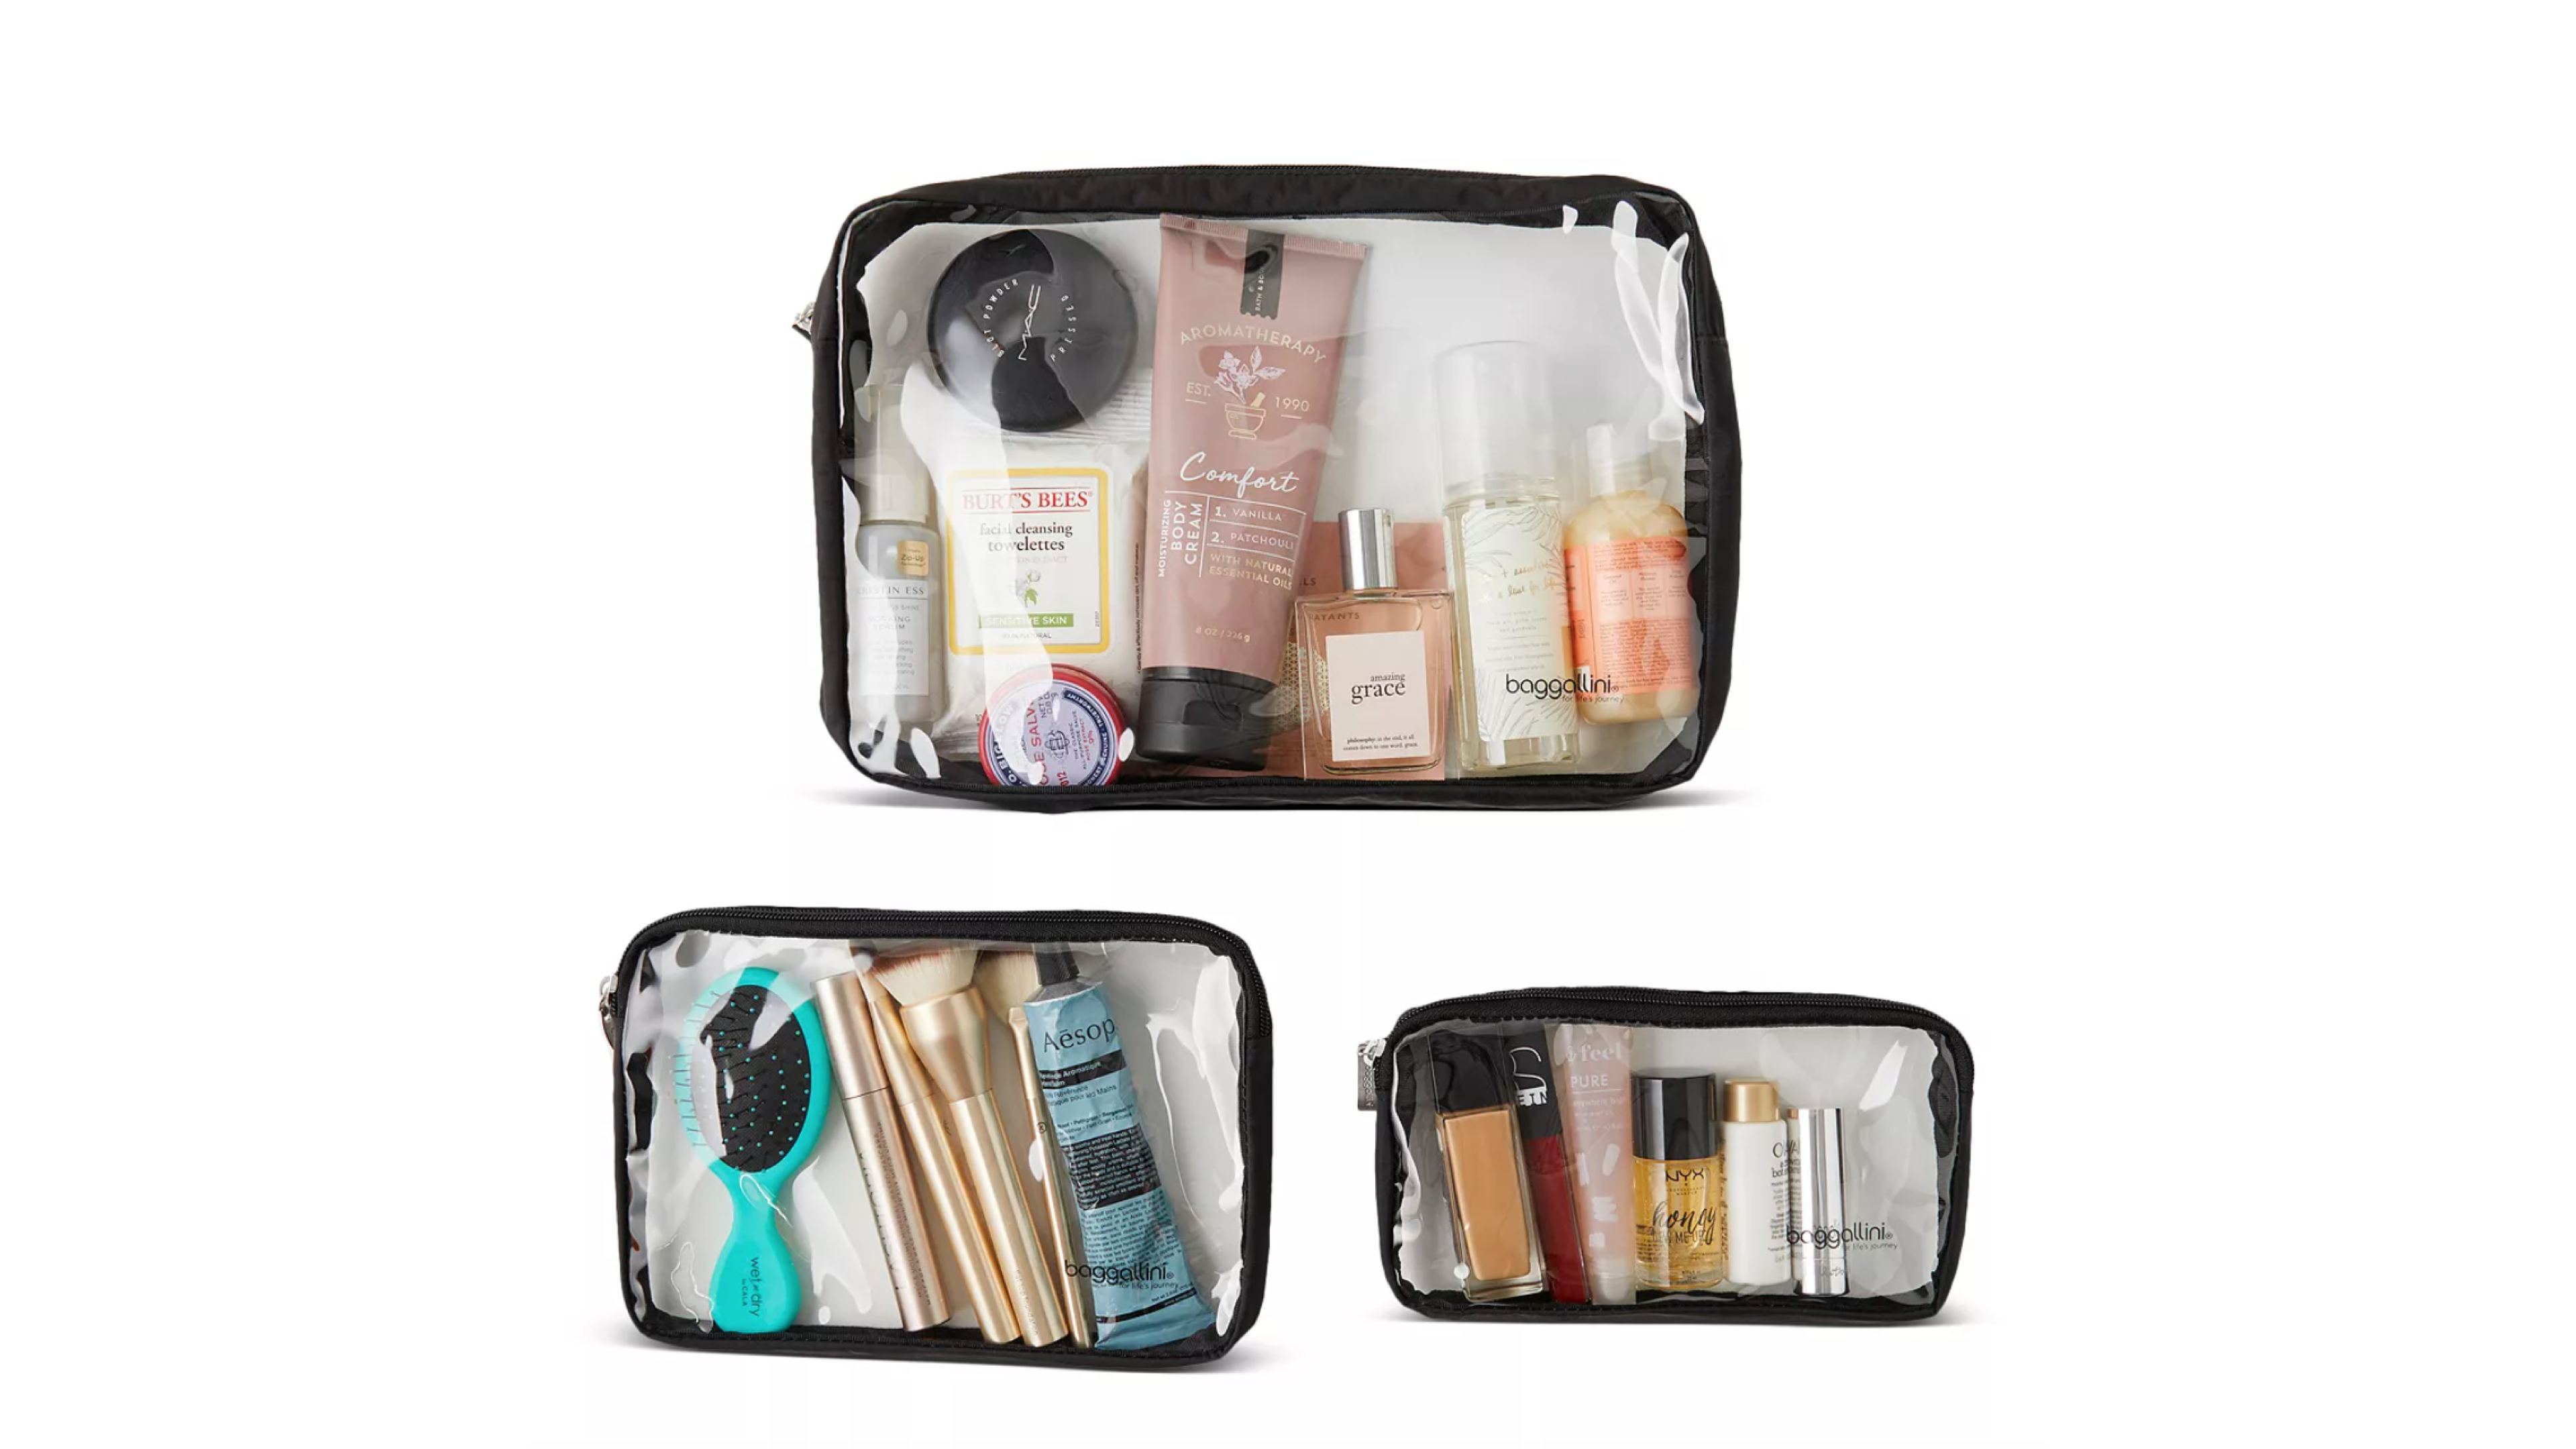 clear pouches that are tsa-friendly for flying